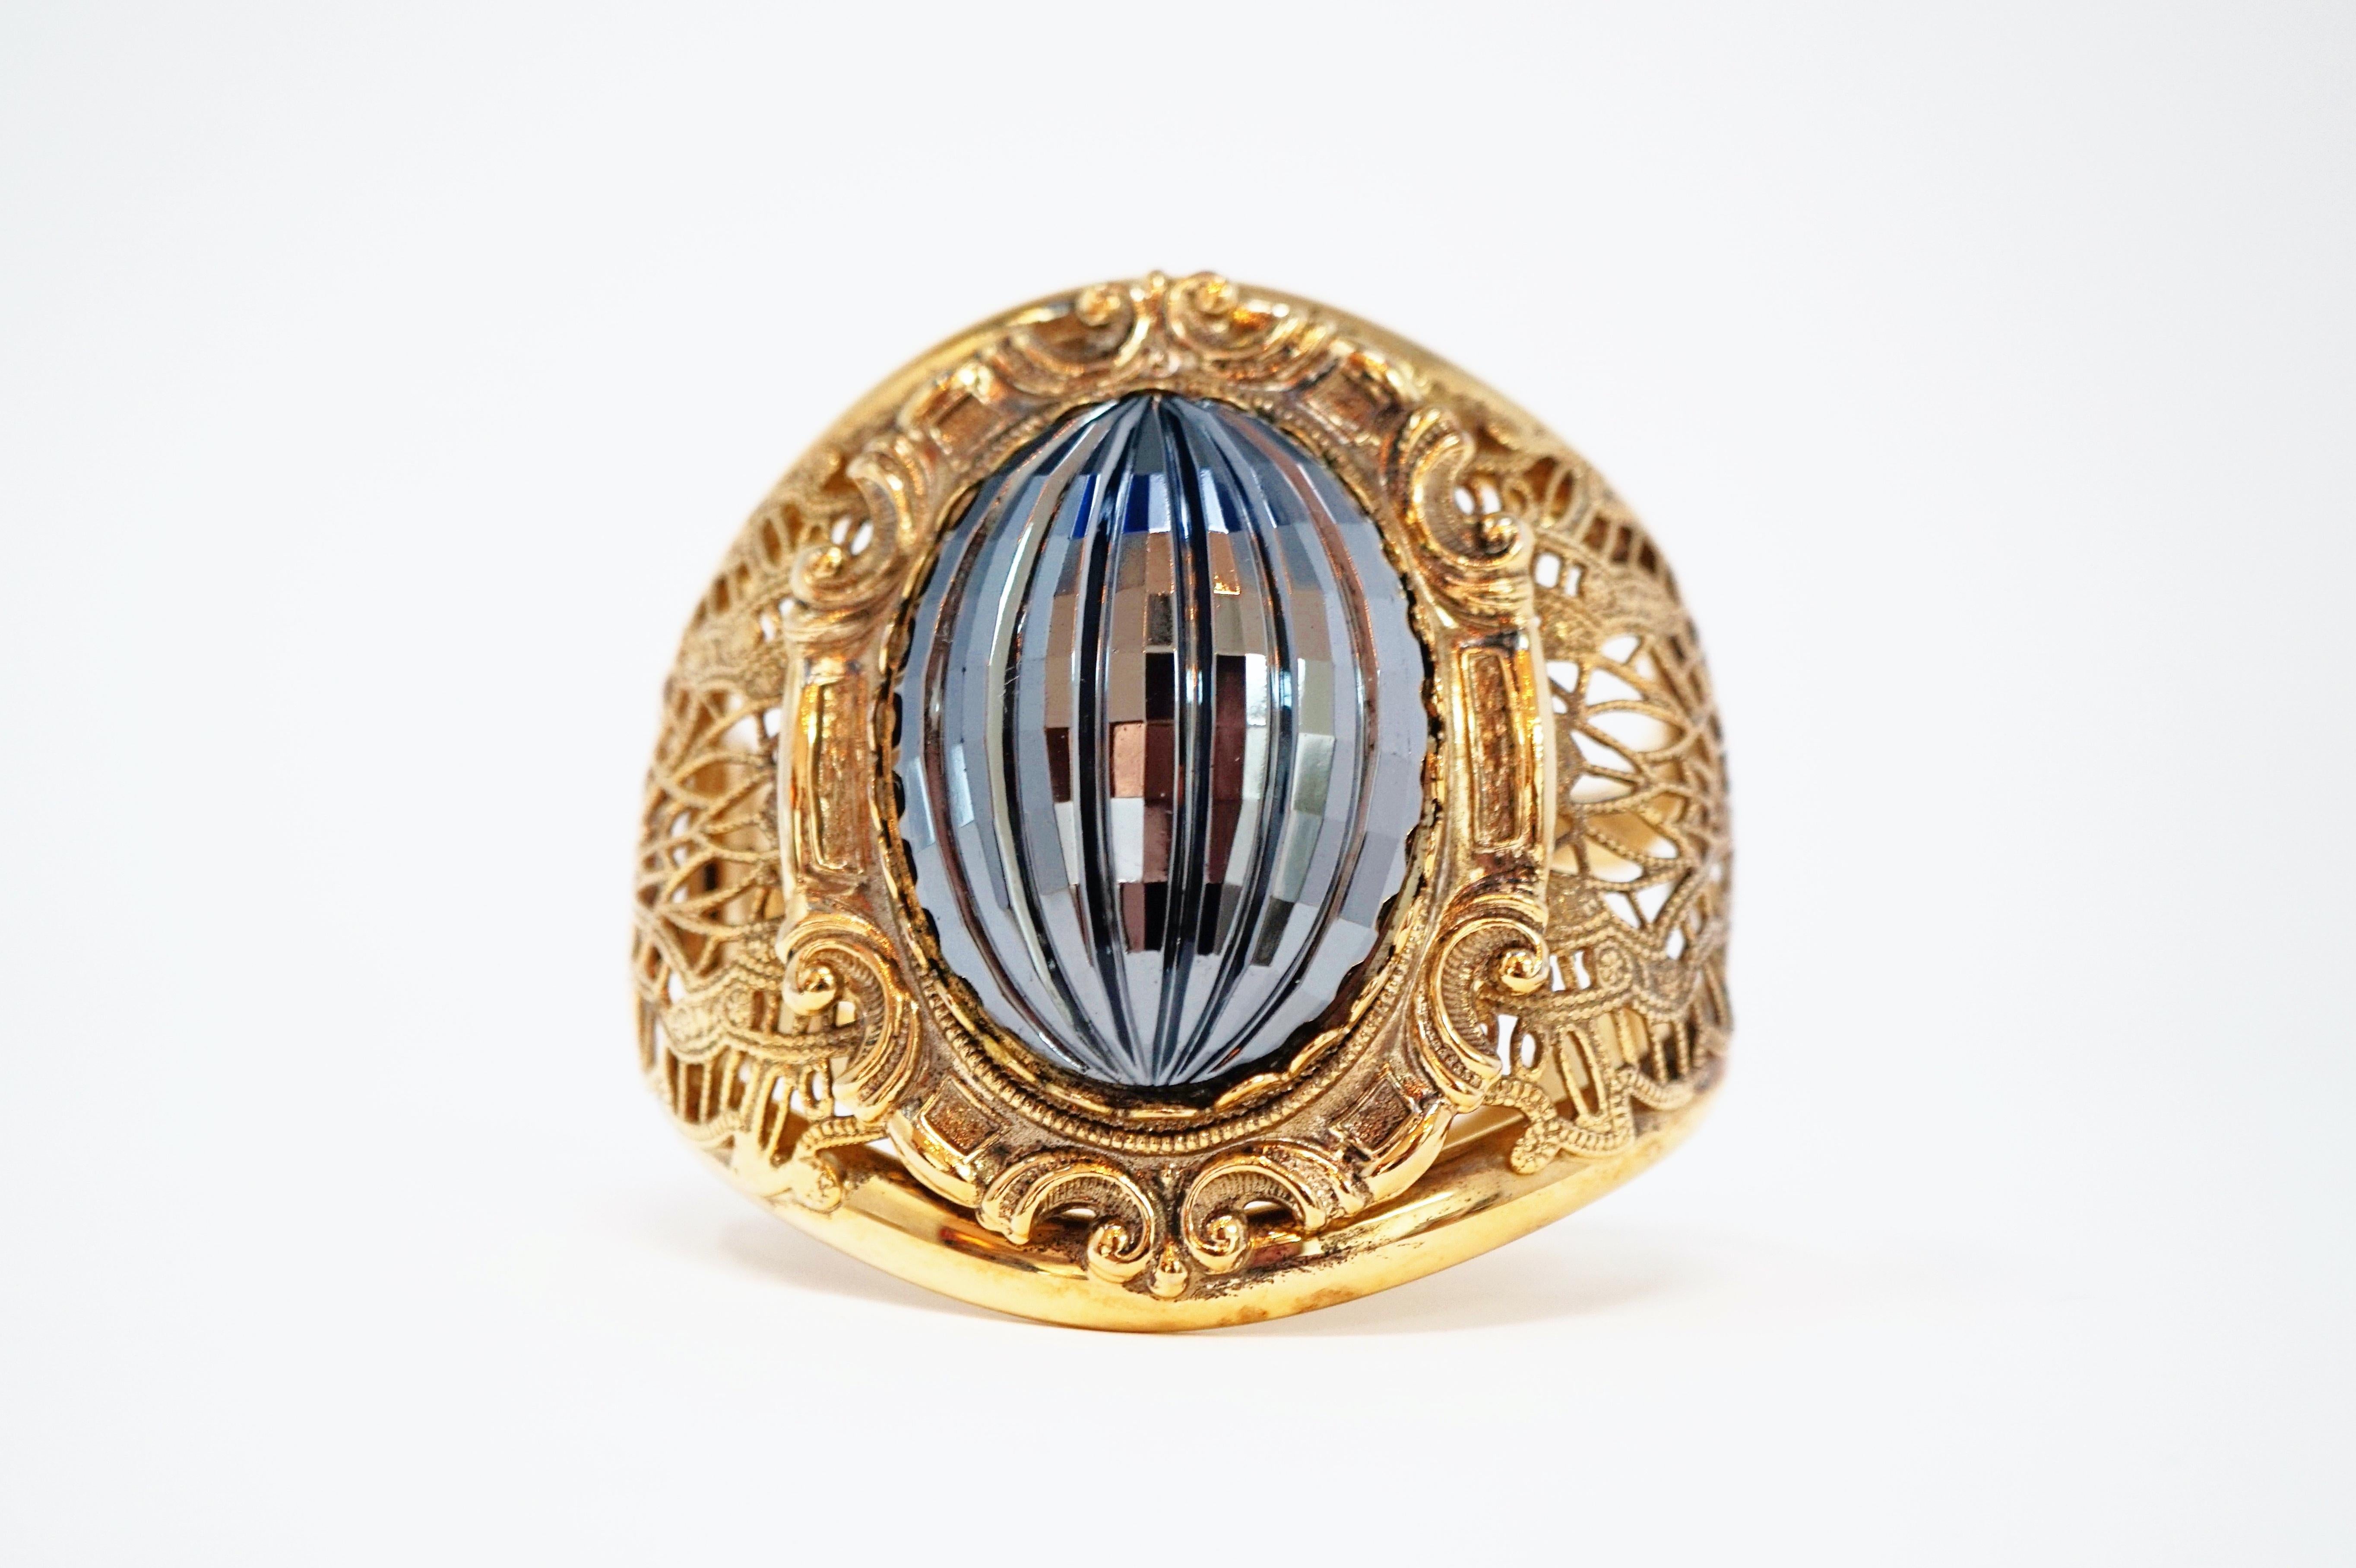 This beautiful and ornate vintage hinged cuff bracelet with large faceted faux Hematite focal cabochon is a bold and unique statement piece!  The gold tone hardware is identical to 1950s Whiting & Davis hinged clamper cuffs, but this piece is